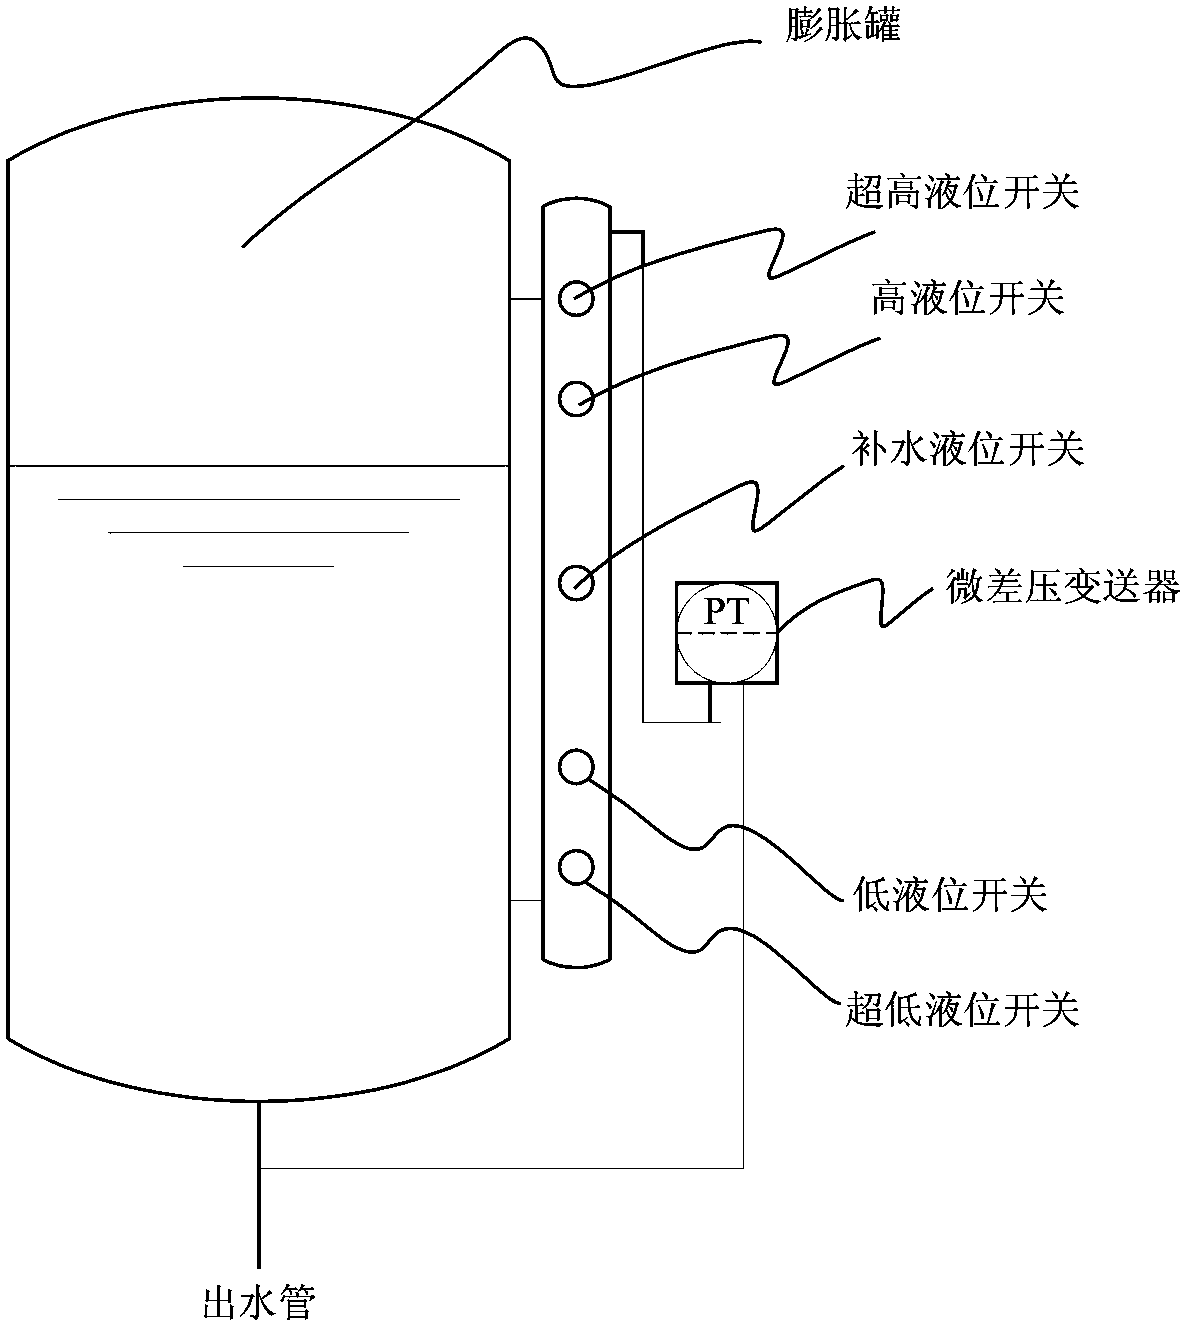 Leakage detection method for closed circulating water system of calcium carbide furnace